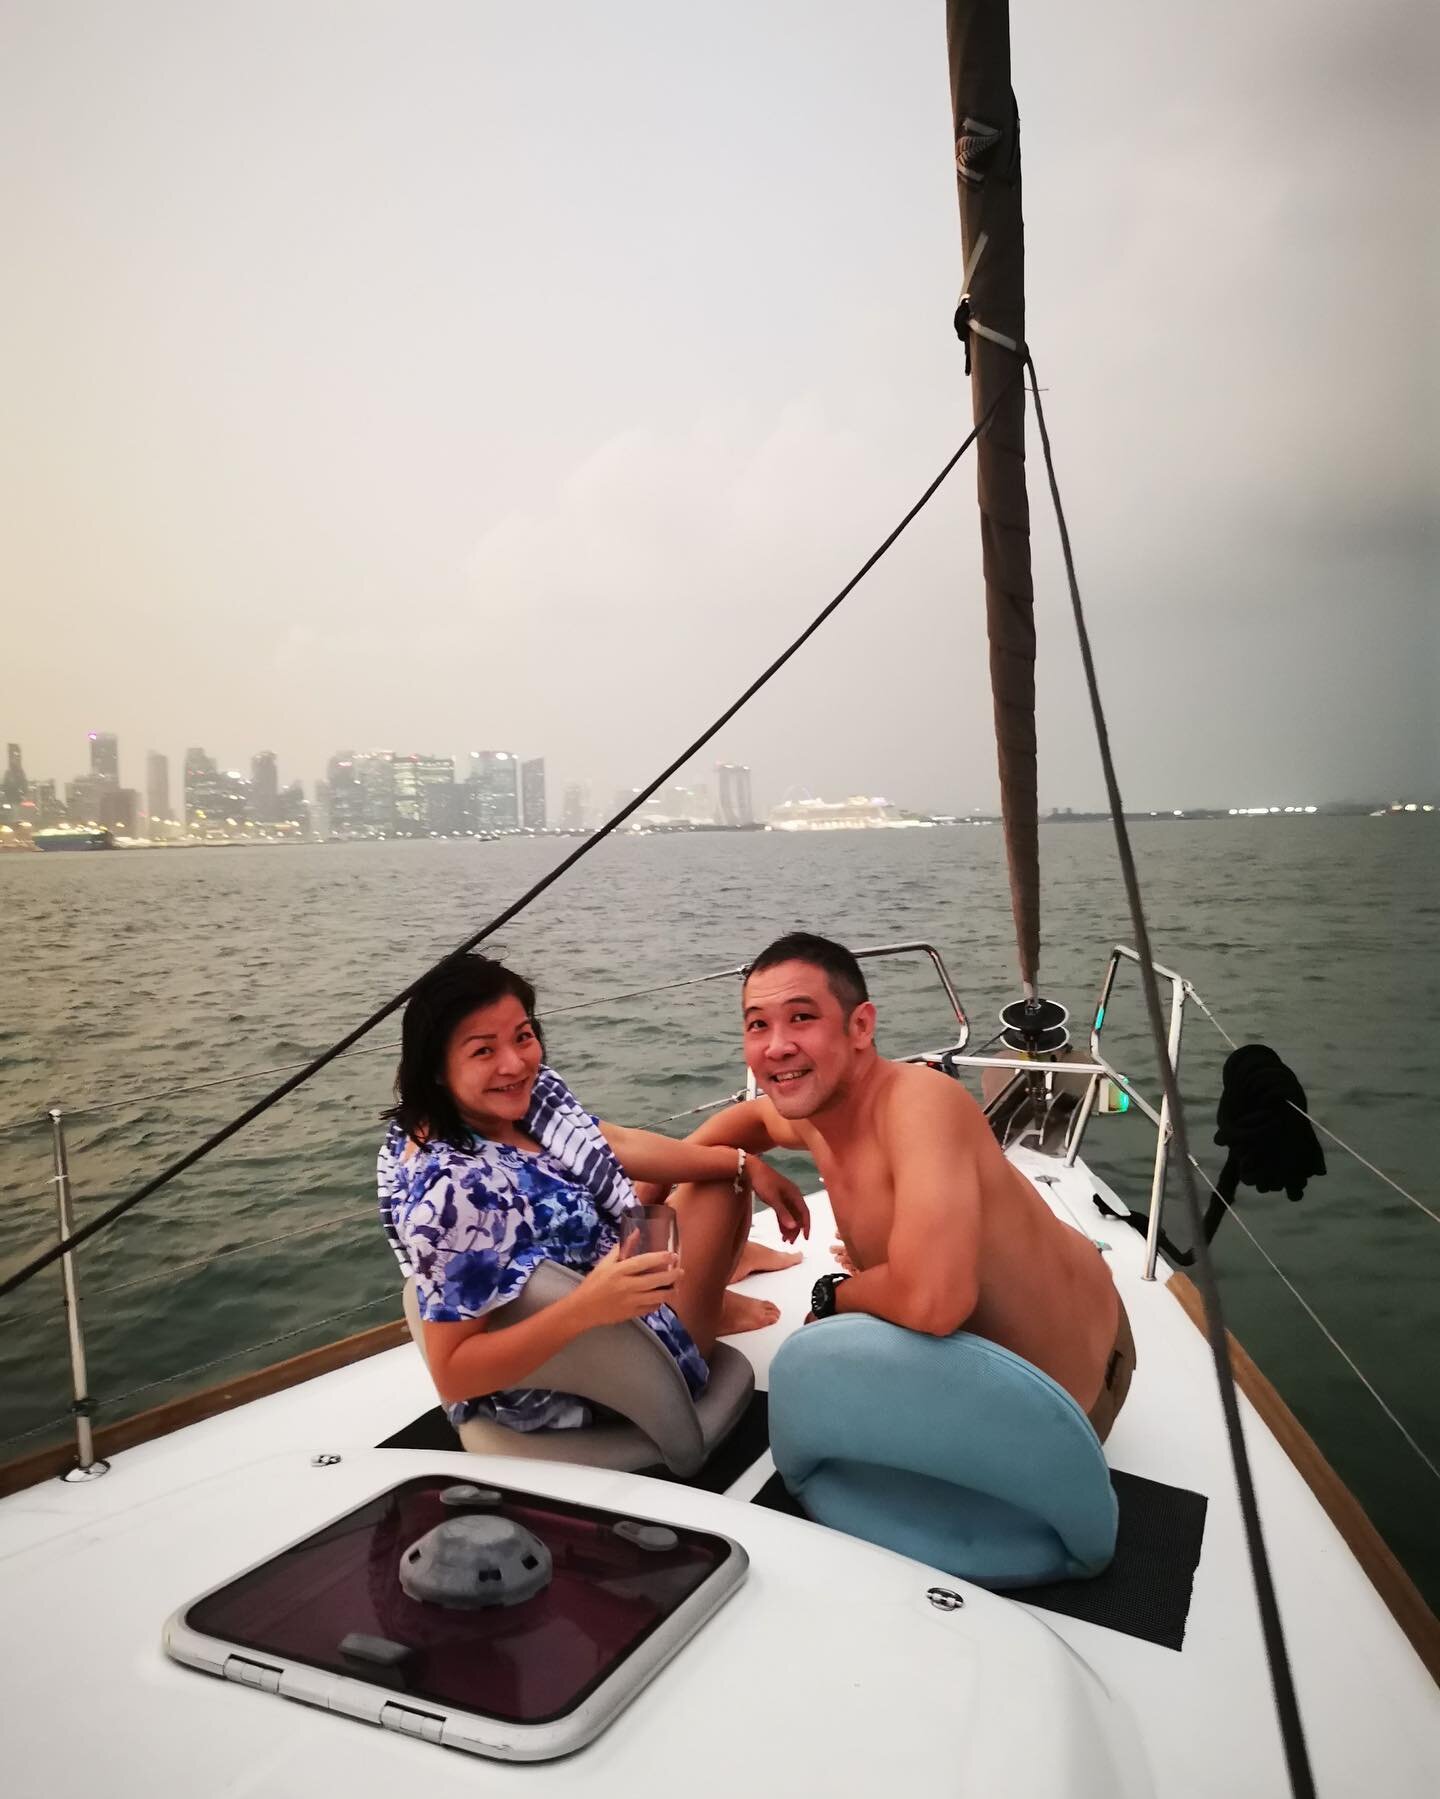 Ain't no rain gonna stop this adventurous couple from sitting at the bow of Epicurean to enjoy the picturesque view and cool breeze! 😁 

#ximulasail #yachtcharter #sailingholiday #couplegoals #couplegetaway